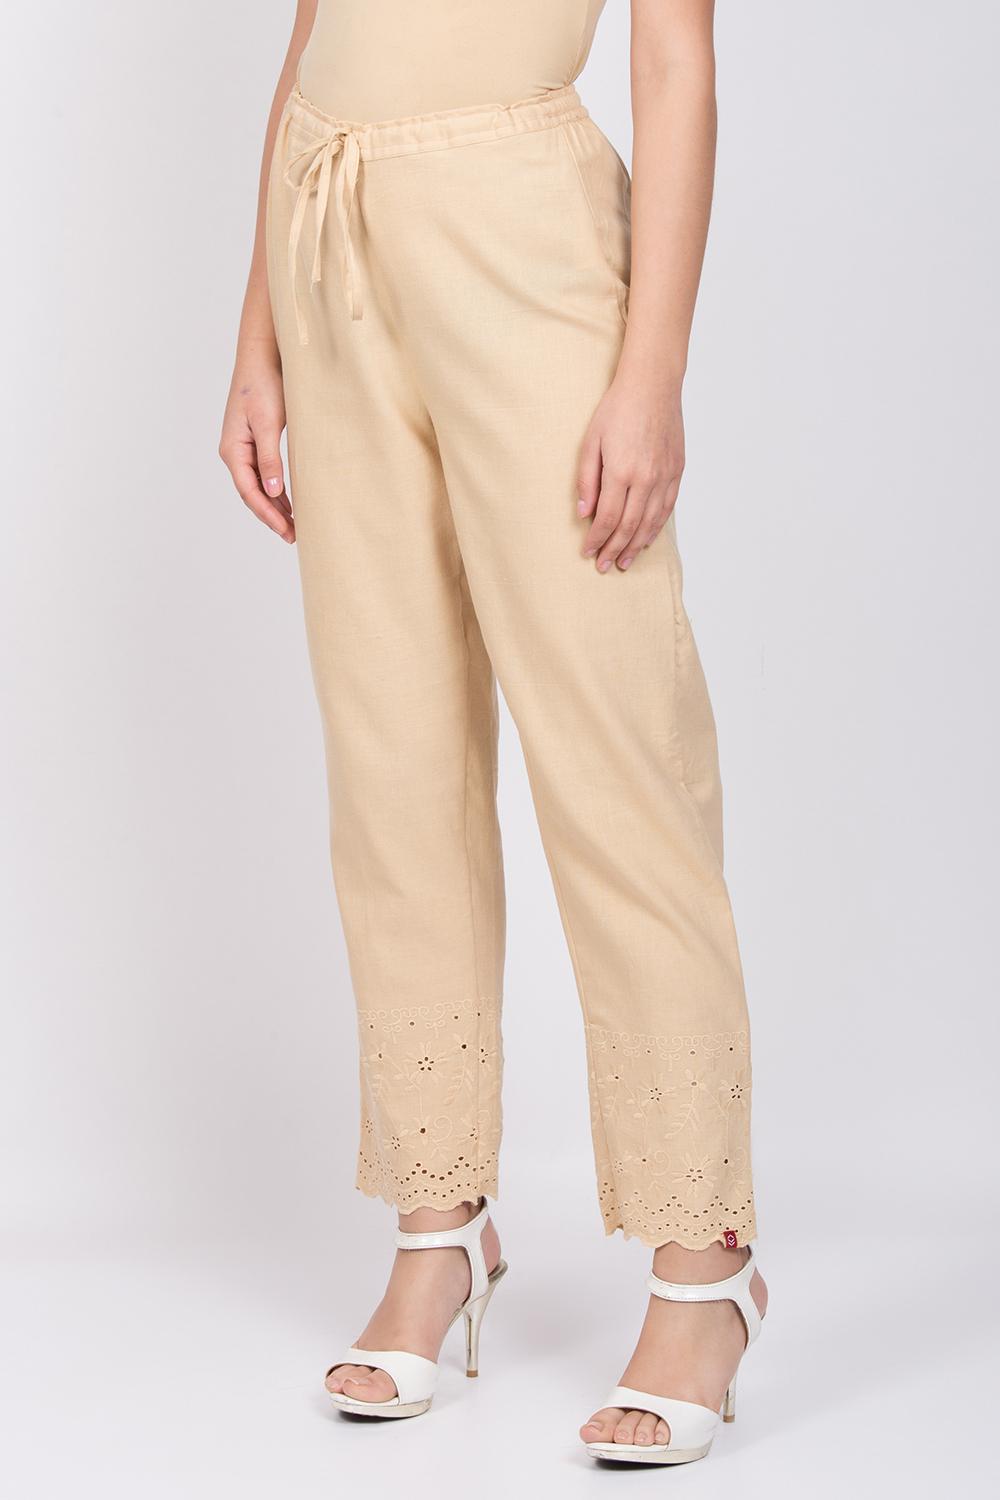 Buy Online Beige Cotton Flax Pants for Women & Girls at Best Prices in ...